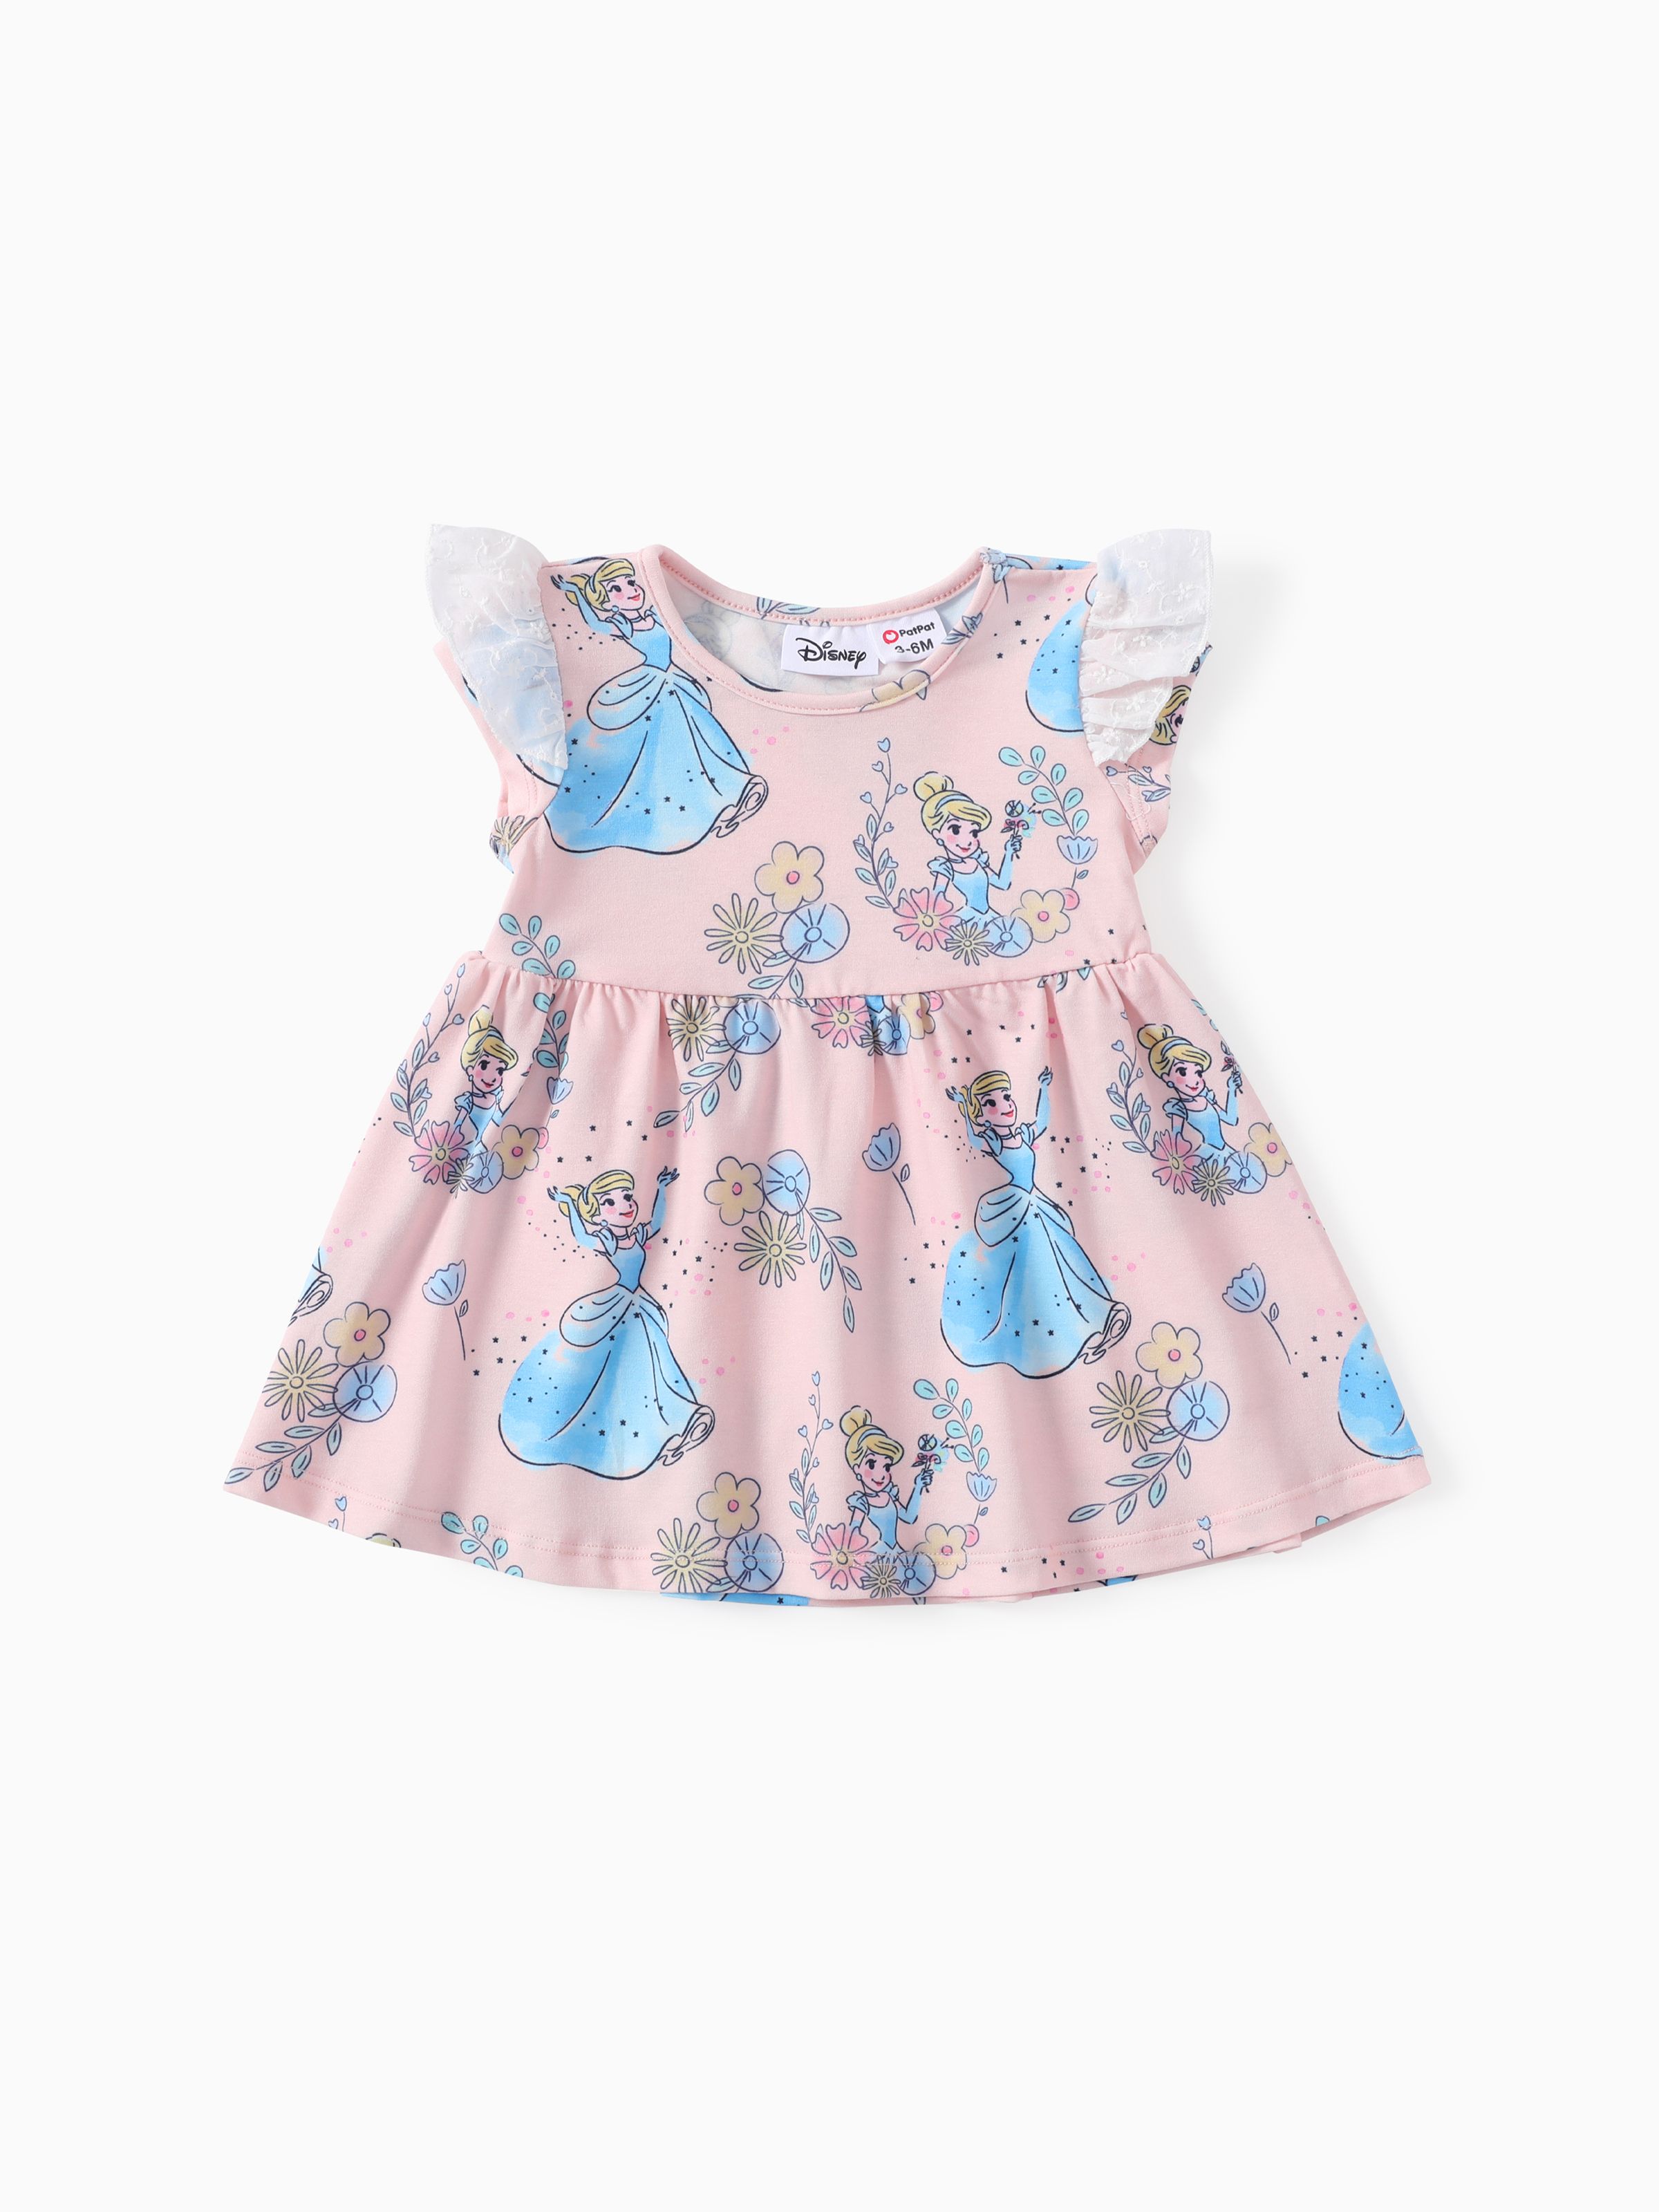 

Disney Princess Baby/Toddler Girls Ariel/Belle/Snow White 1pc Naia™ Character All-over Print Lace Ruffled-sleeve Dress